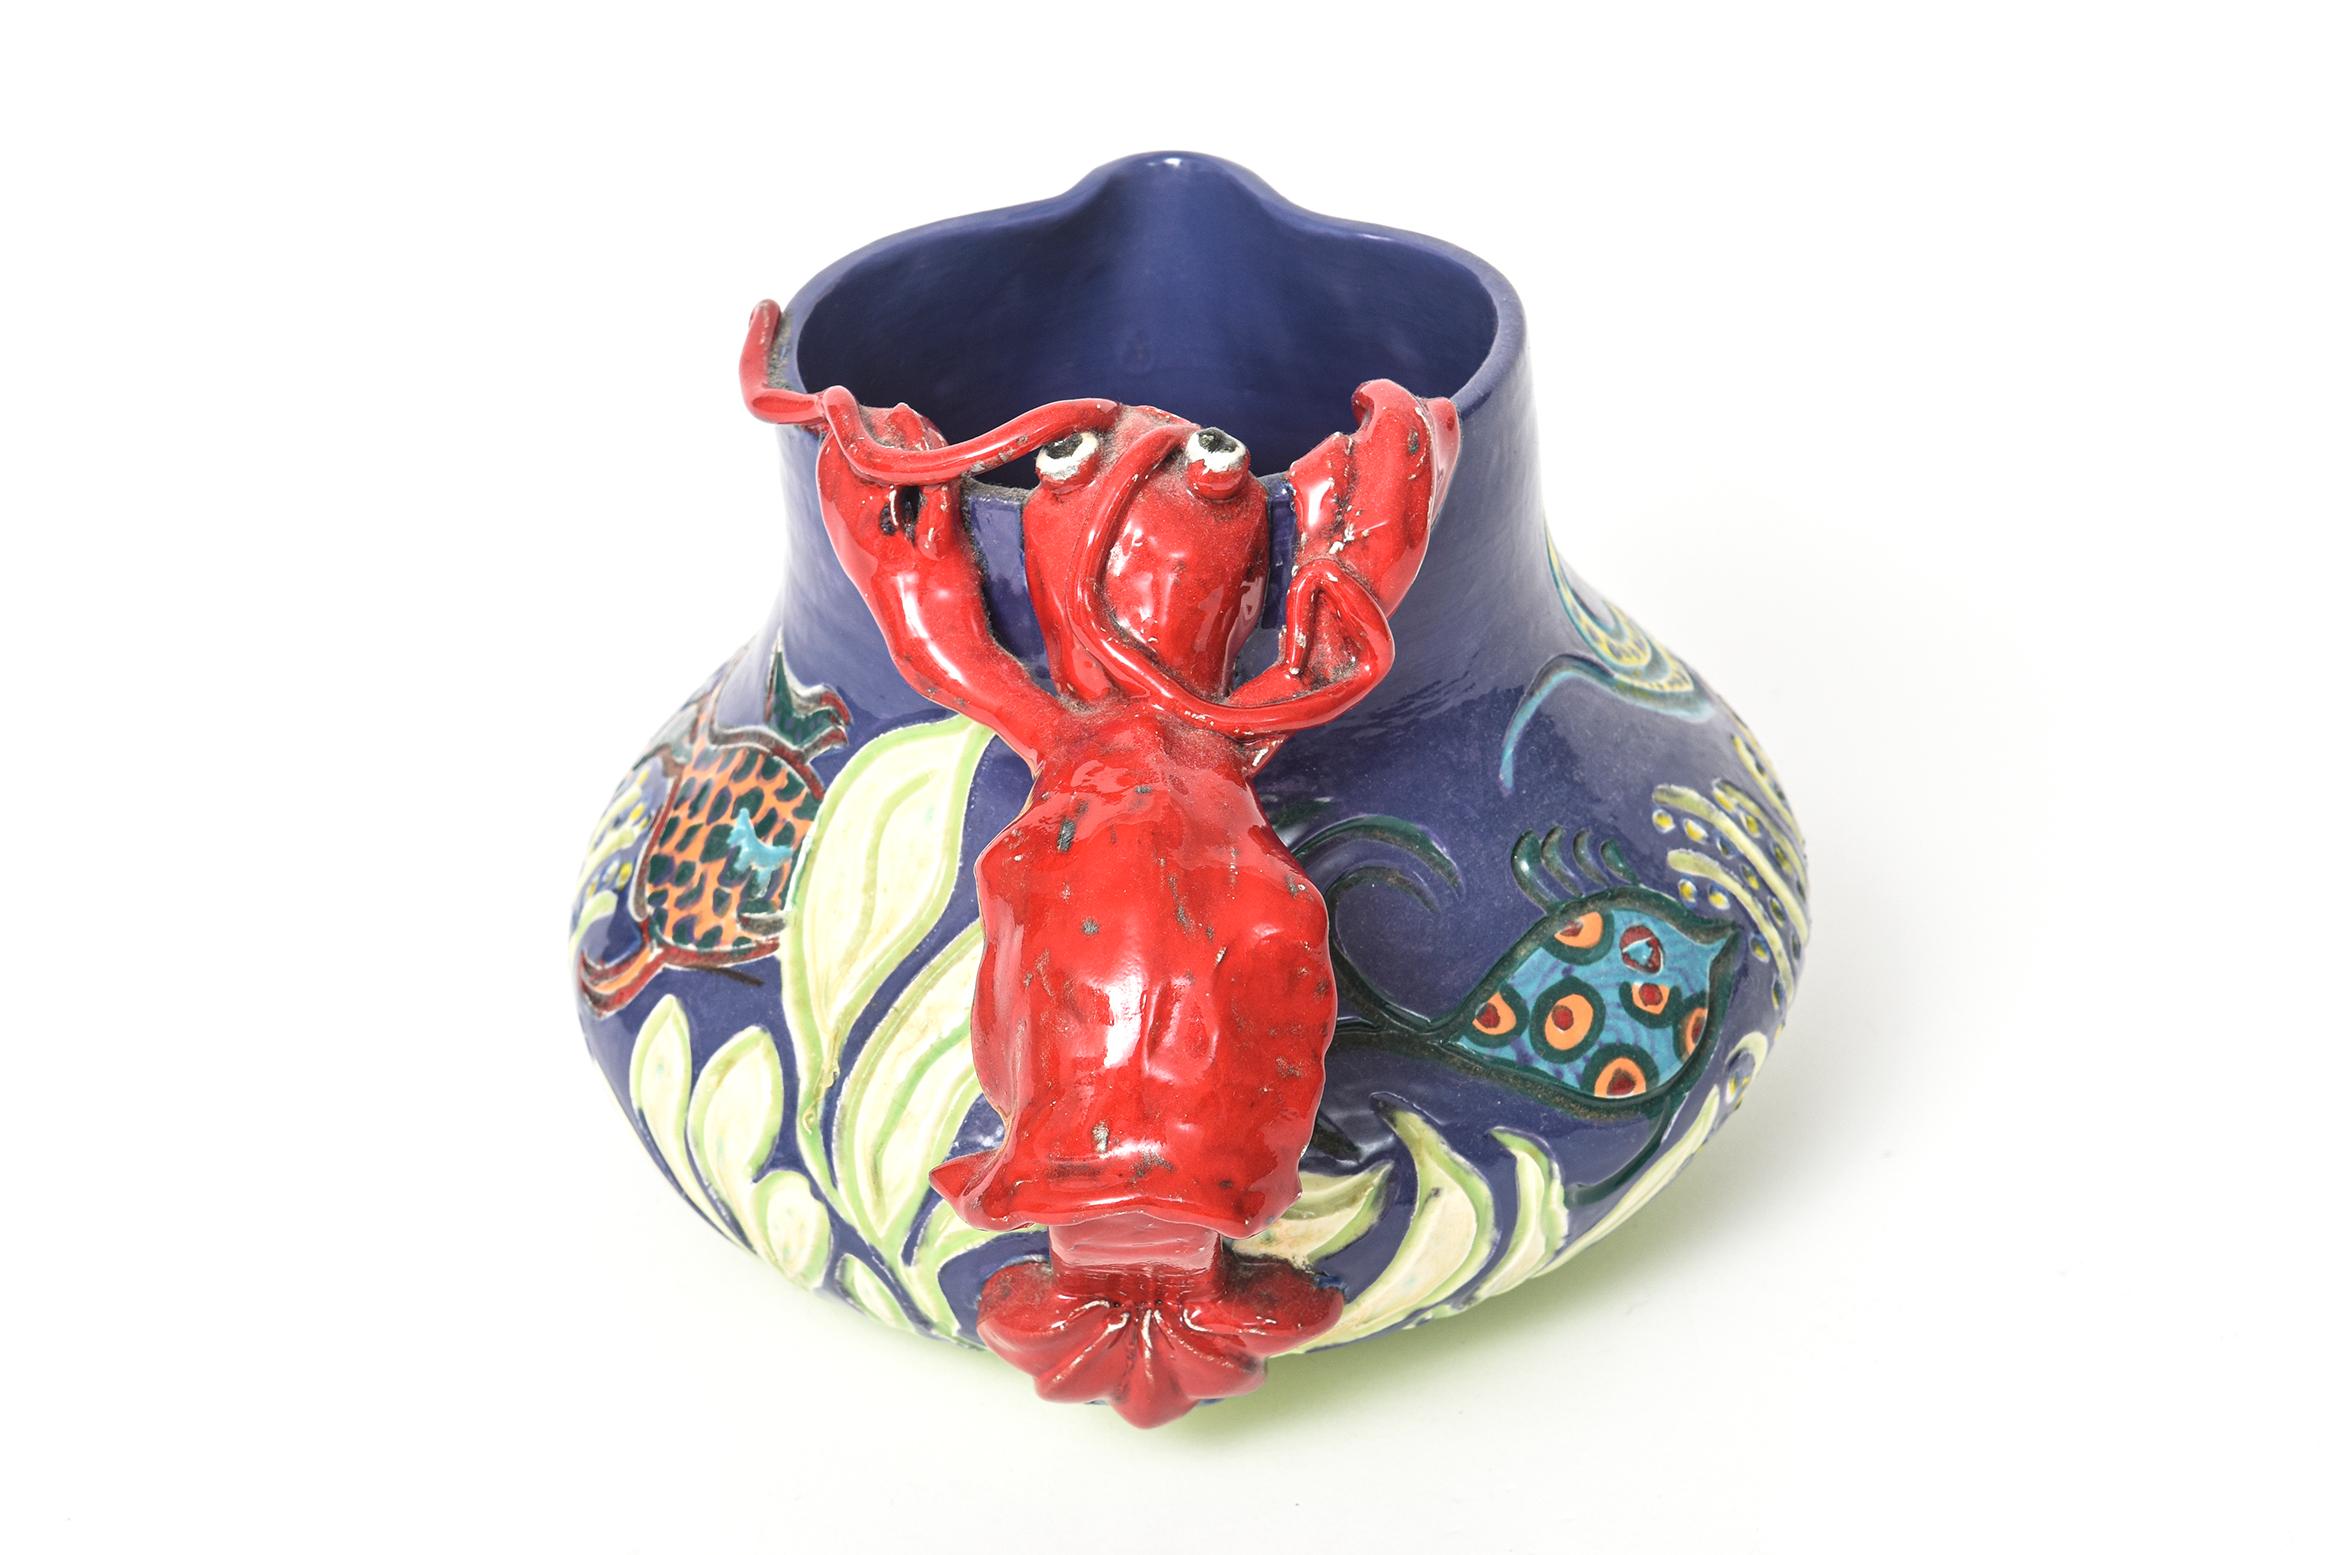 Unique handmade folk art pottery featuring a sealife design with fish swimming though a flowing underwater forest. The handle of the pitcher is a red lobster. The piece is signed but the signature is not legible. It is dated 1997 and number 011.